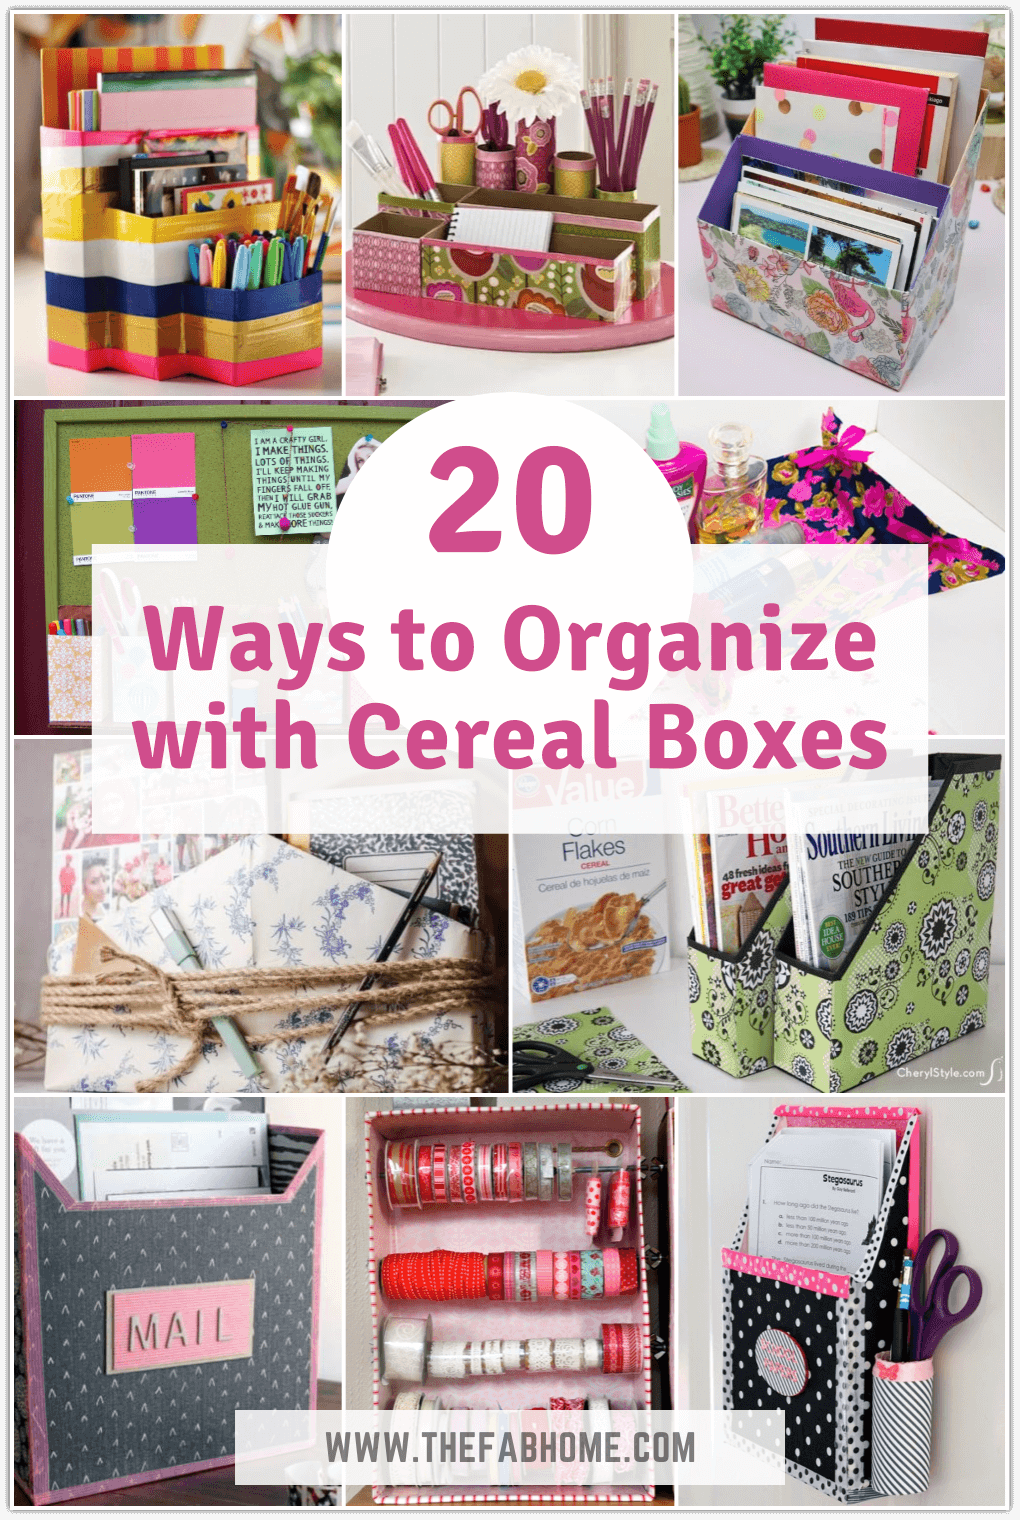 Don't throw away those cereal boxes - you can do a lot with them! Here are 20 Genius Ways to Organize with Cereal Boxes - some of these are mind blowing!